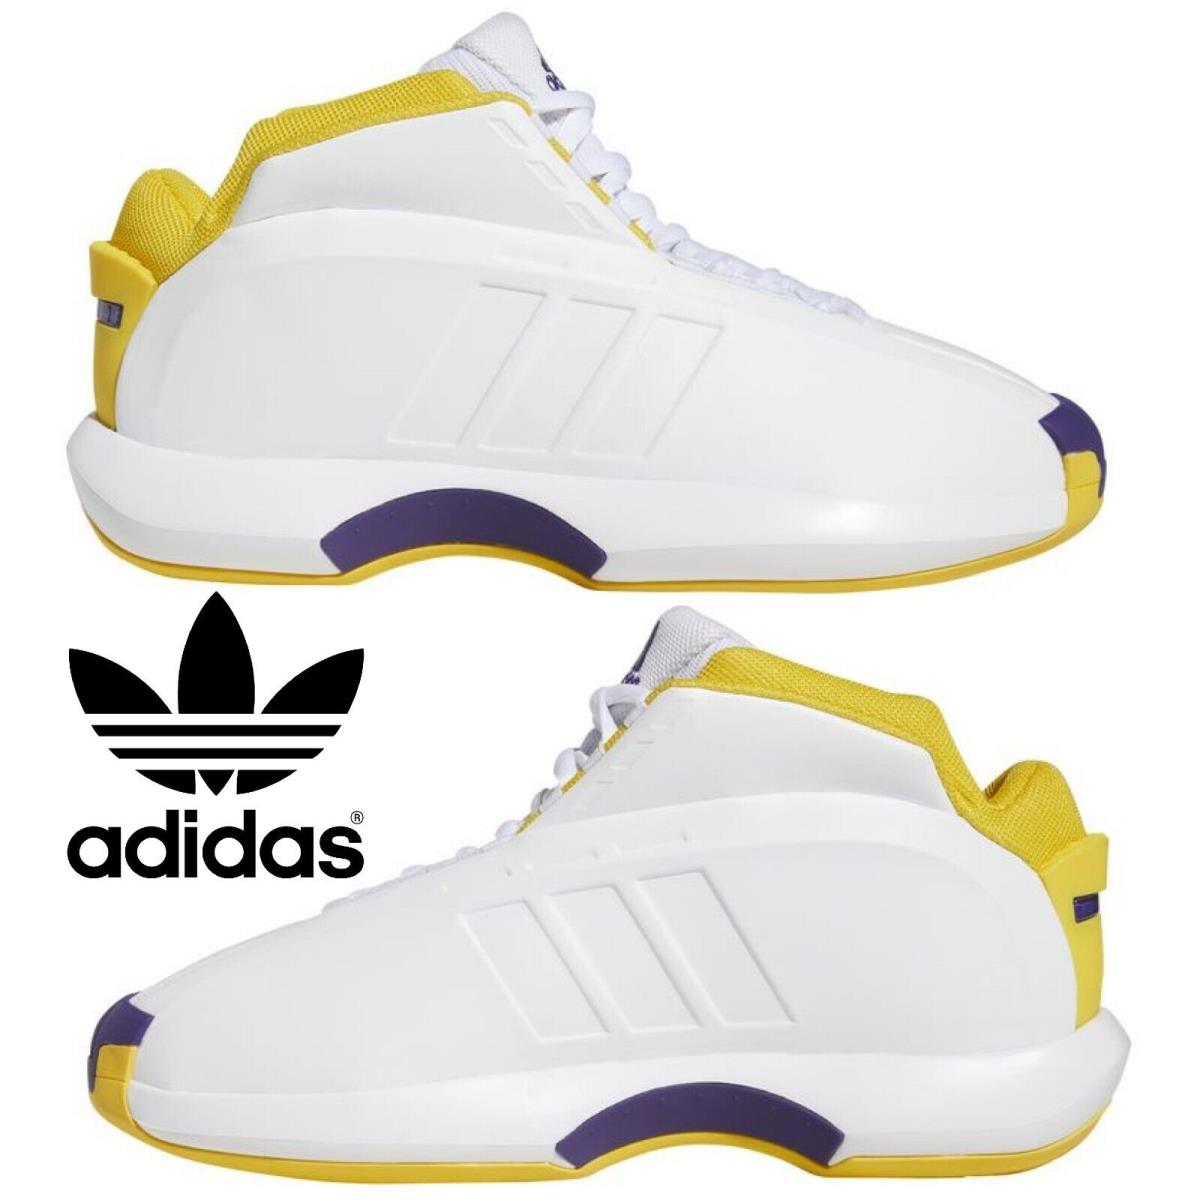 Adidas Crazy 1 Men`s Sneakers Basketball Shoes Running Gym Court Sport White - White, Manufacturer: White/Yellow